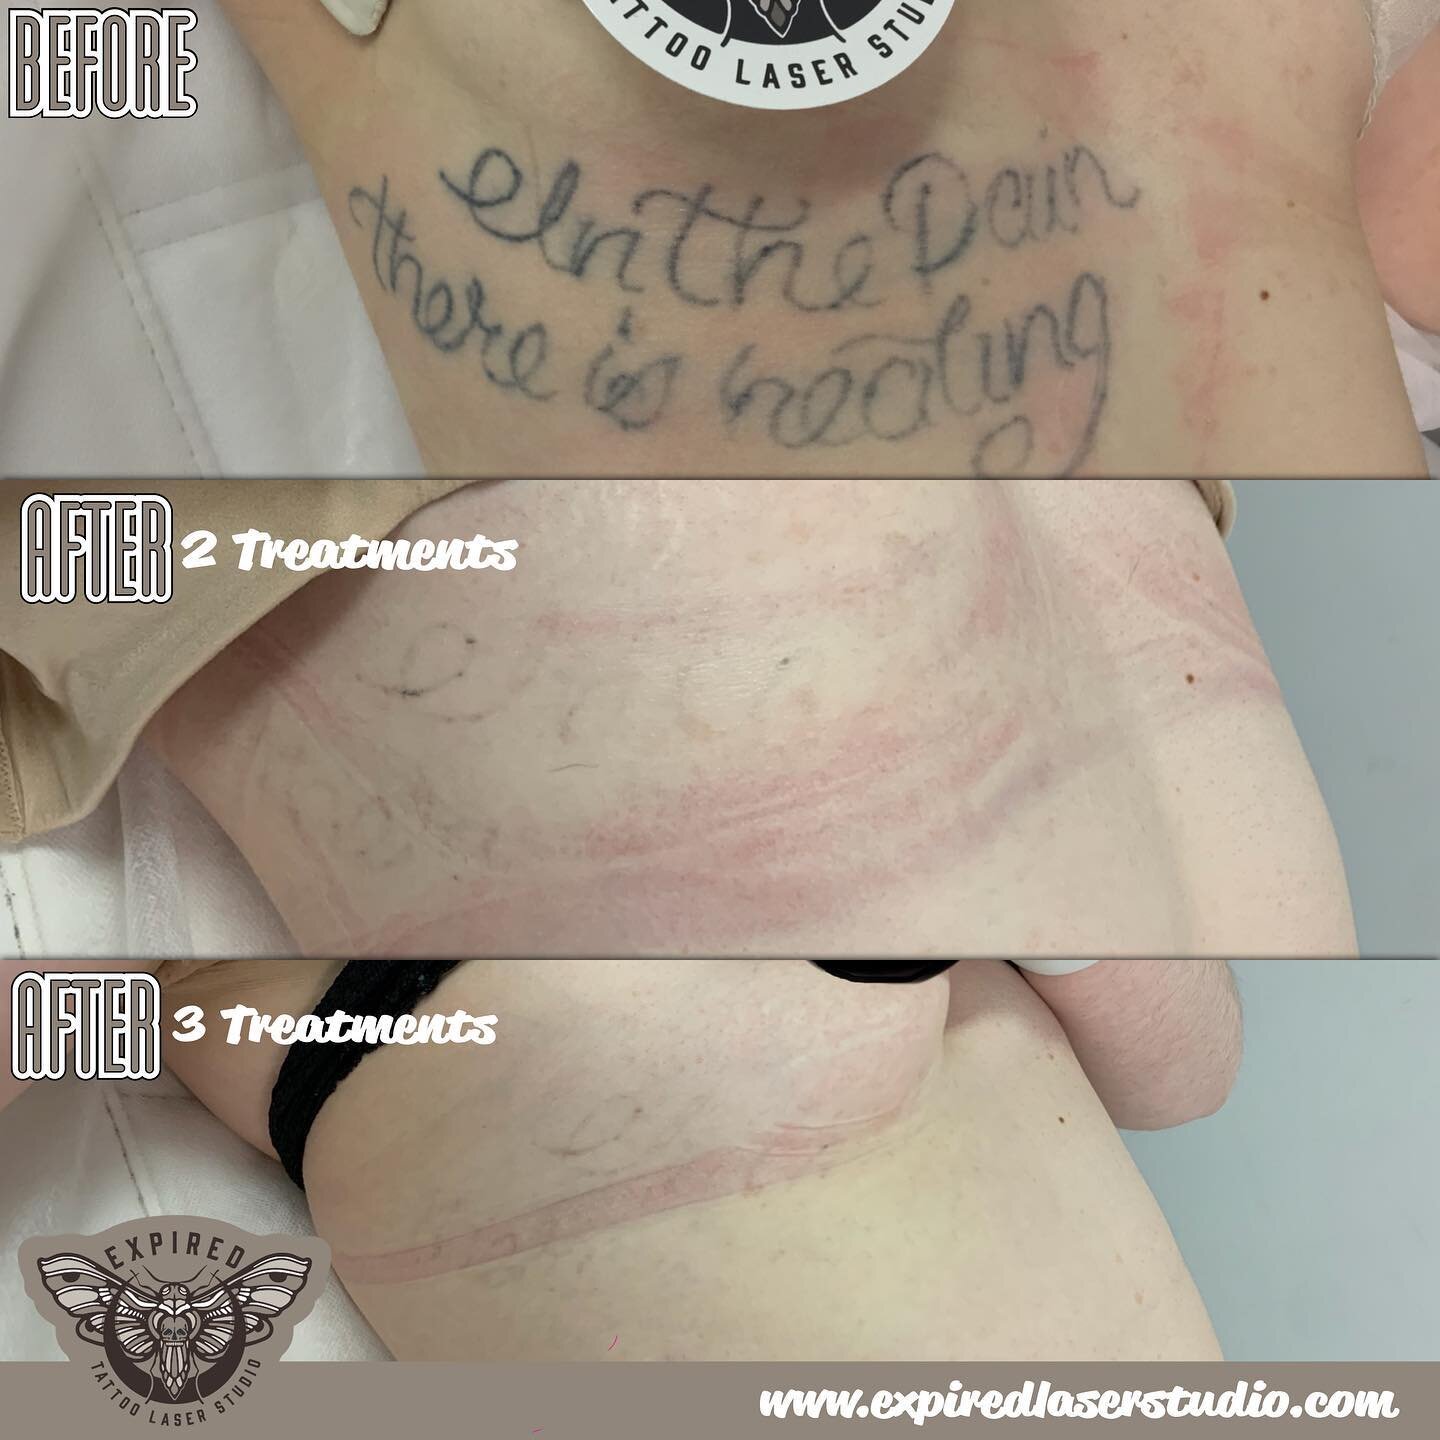 Let&rsquo;s talk &ldquo;home-job tattoo&rsquo;s&rdquo;.
When it comes to result expectations with non-professional tattoo&rsquo;s generally they treat a whole lot better than professional tattoo&rsquo;s. The ink&rsquo;s used are questionable and in s